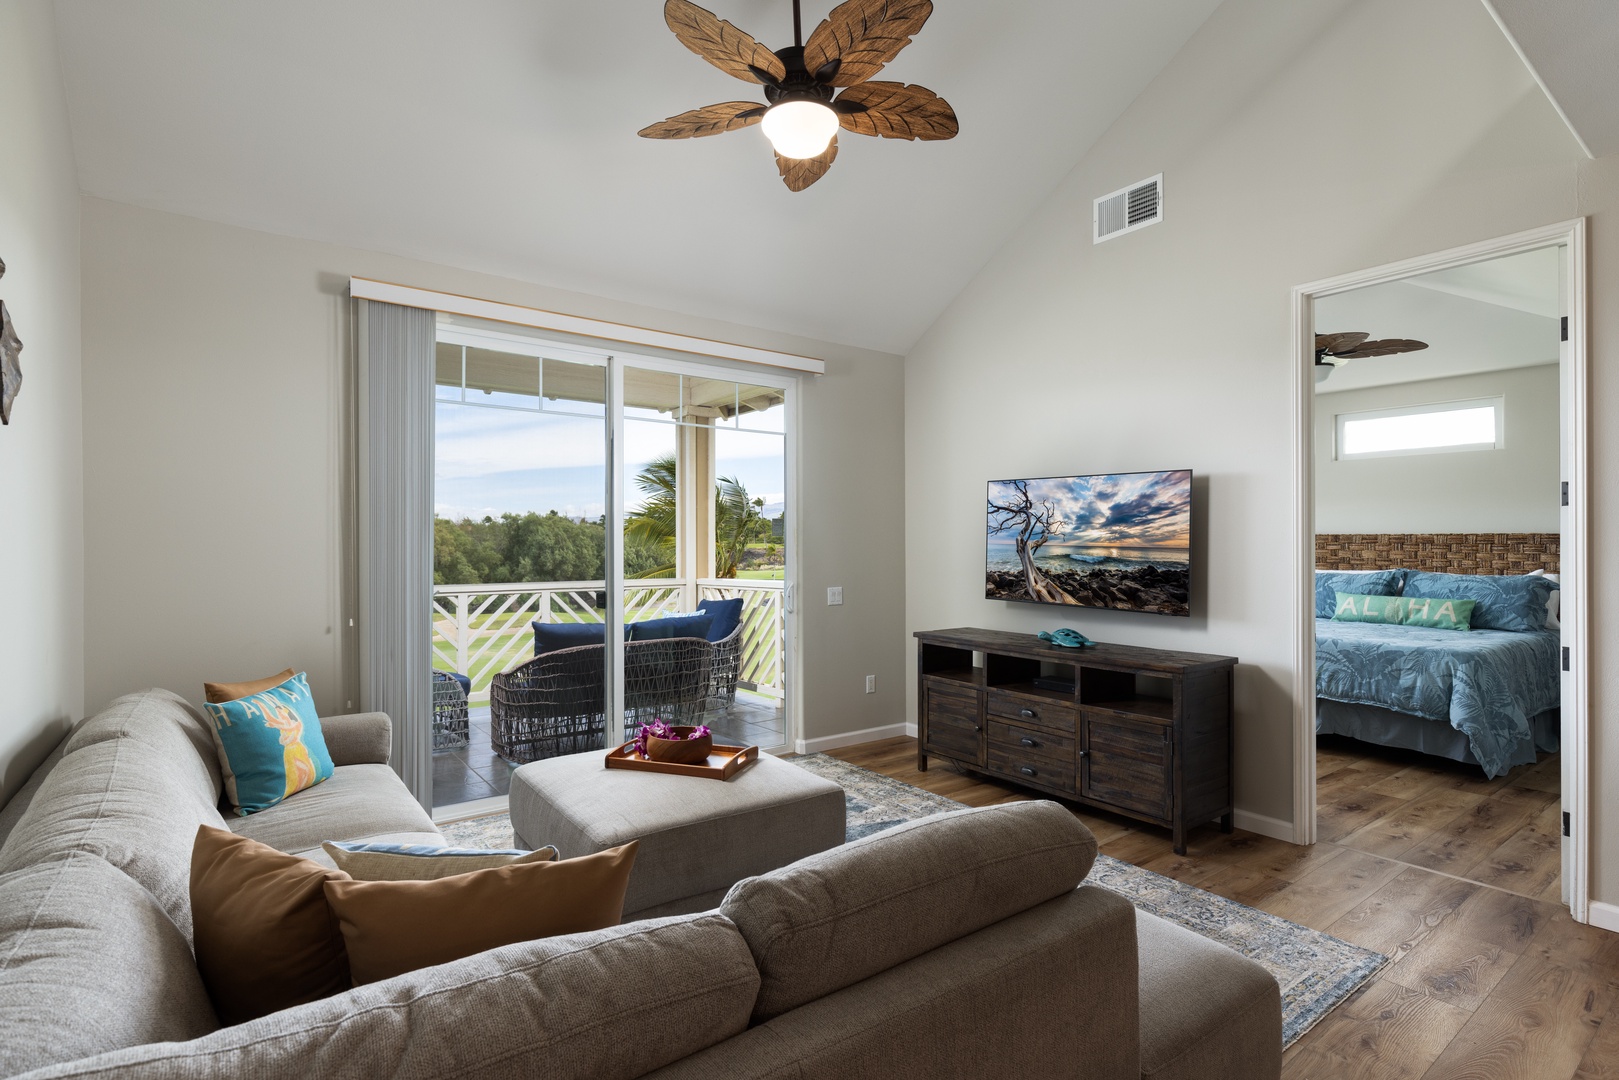 Waikoloa Vacation Rentals, Fairway Villas at Waikoloa Beach Resort E34 - Gather the family to watch a sports event or your favorite shows in the living room area